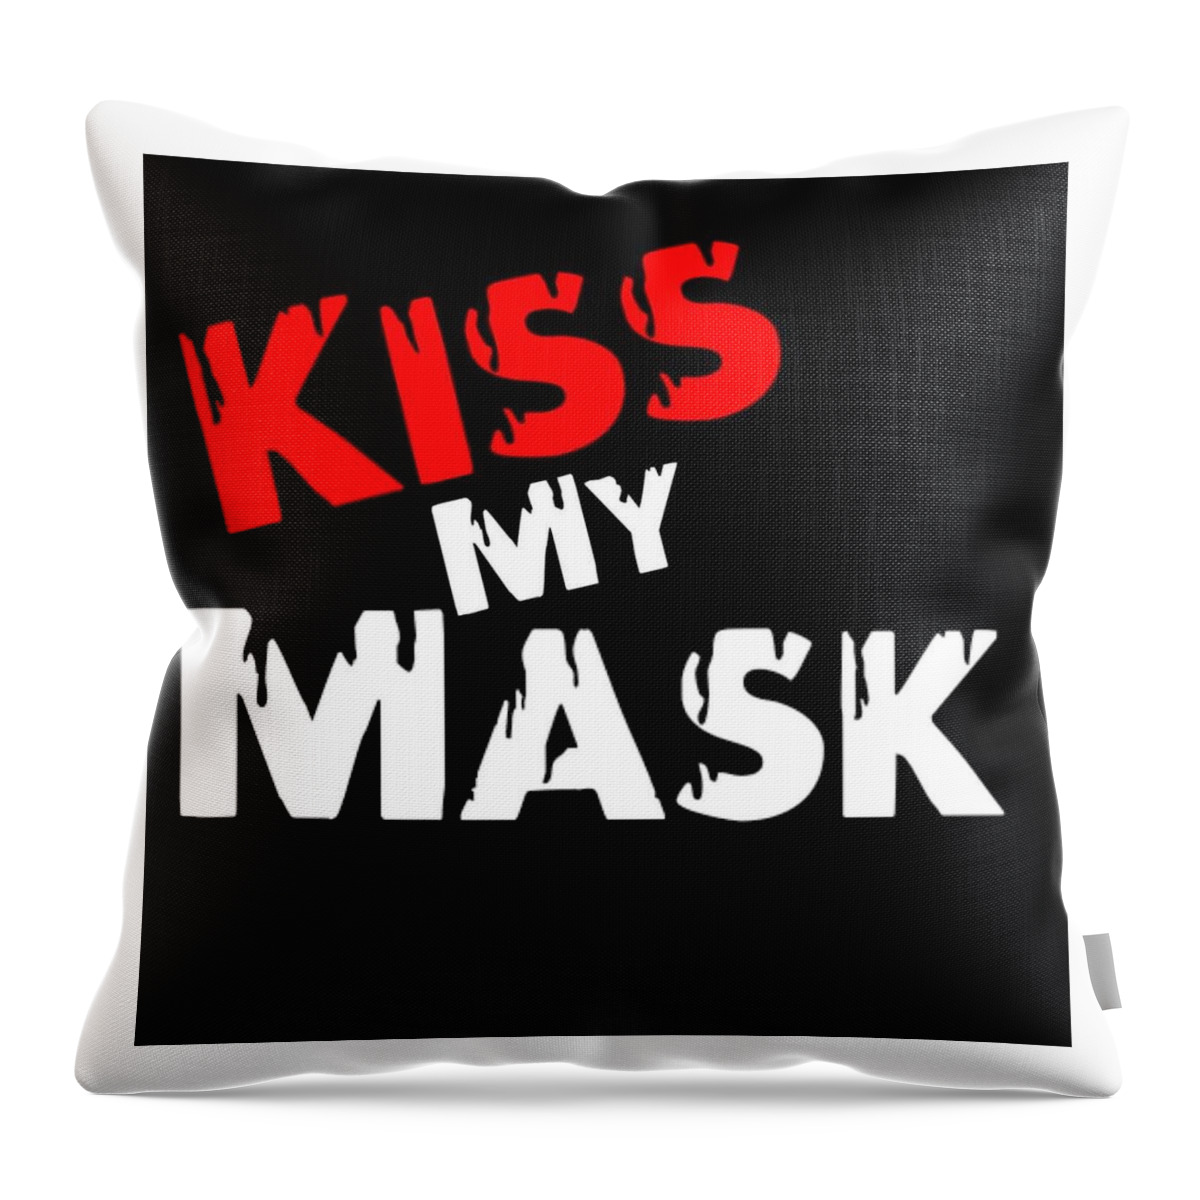  Throw Pillow featuring the digital art Kiss My Mask by Tony Camm